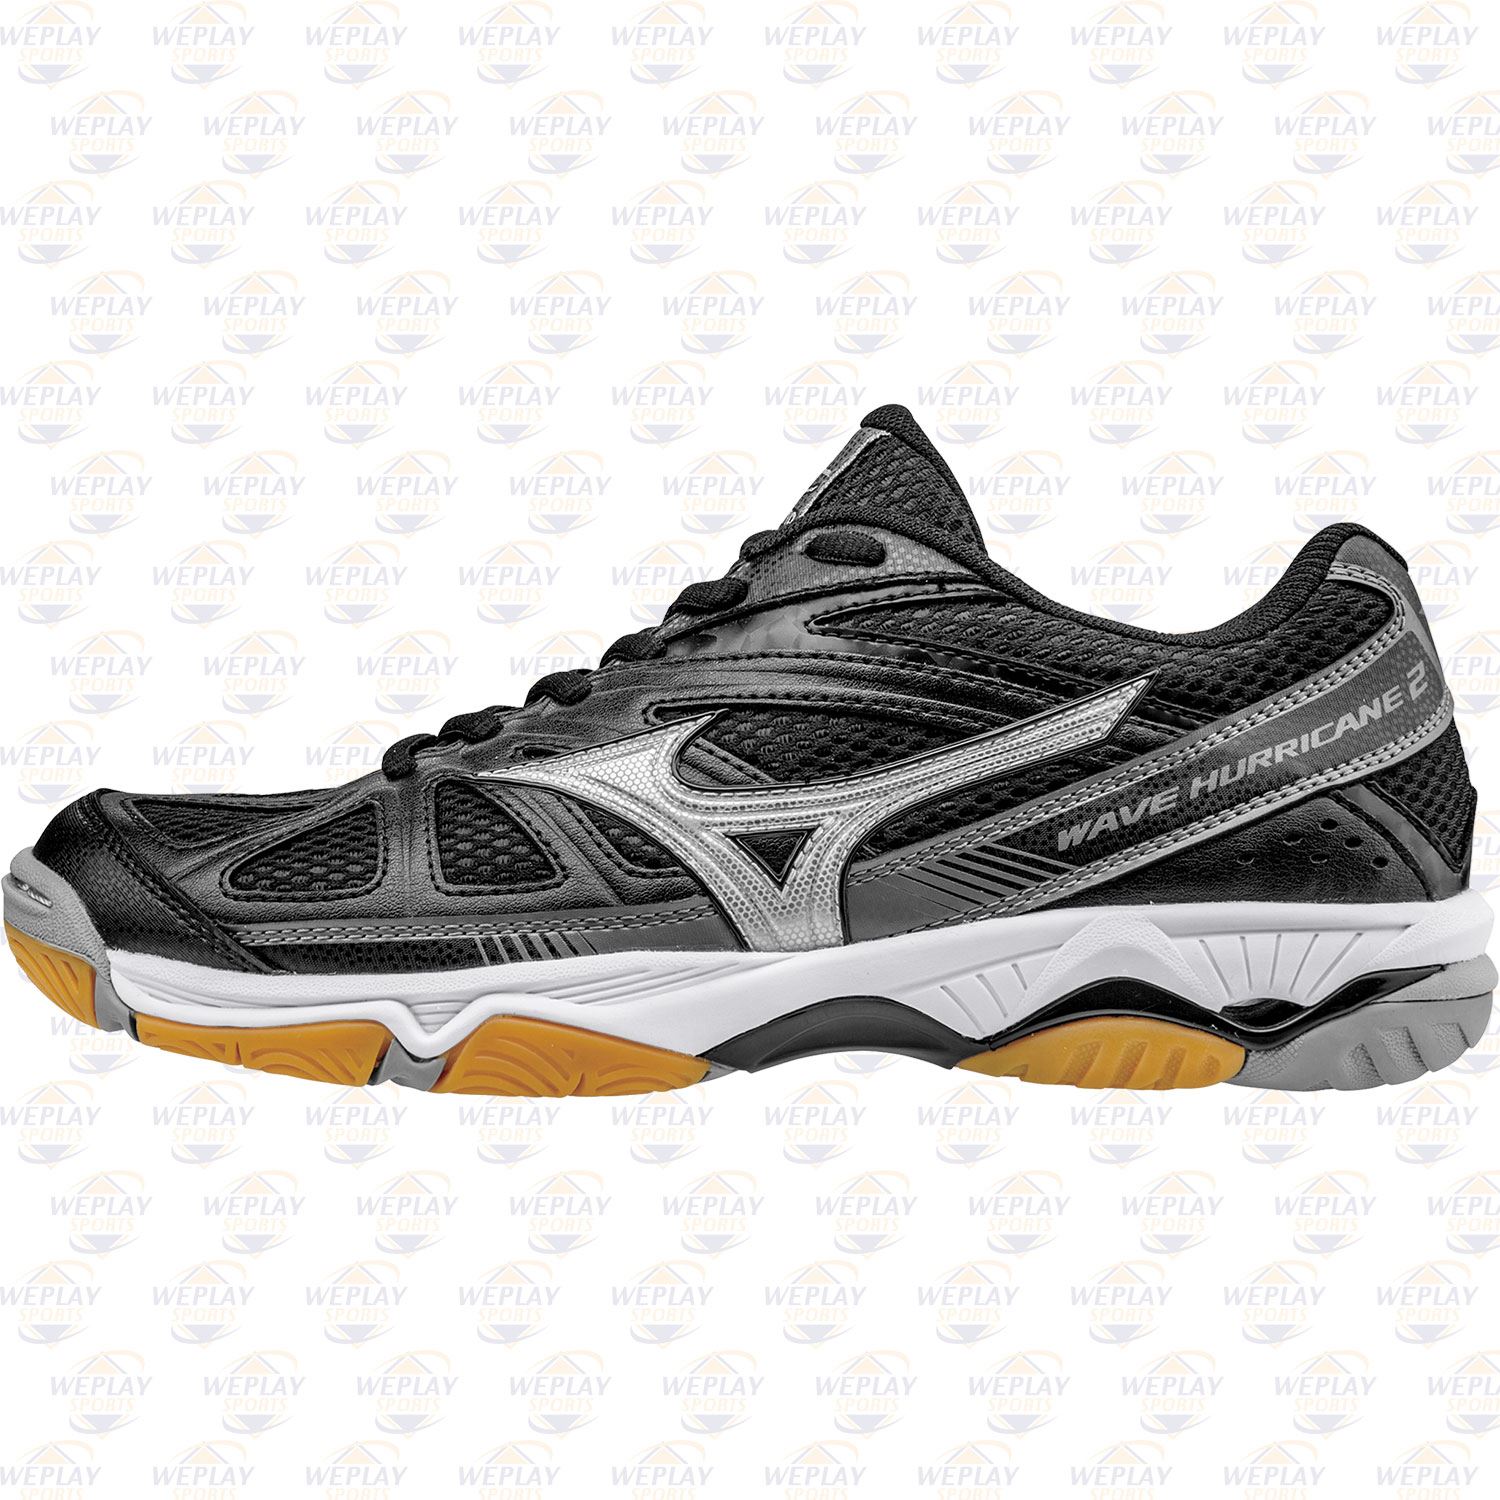 Mizuno Womens Wave Hurricane WOS Volleyball Shoes